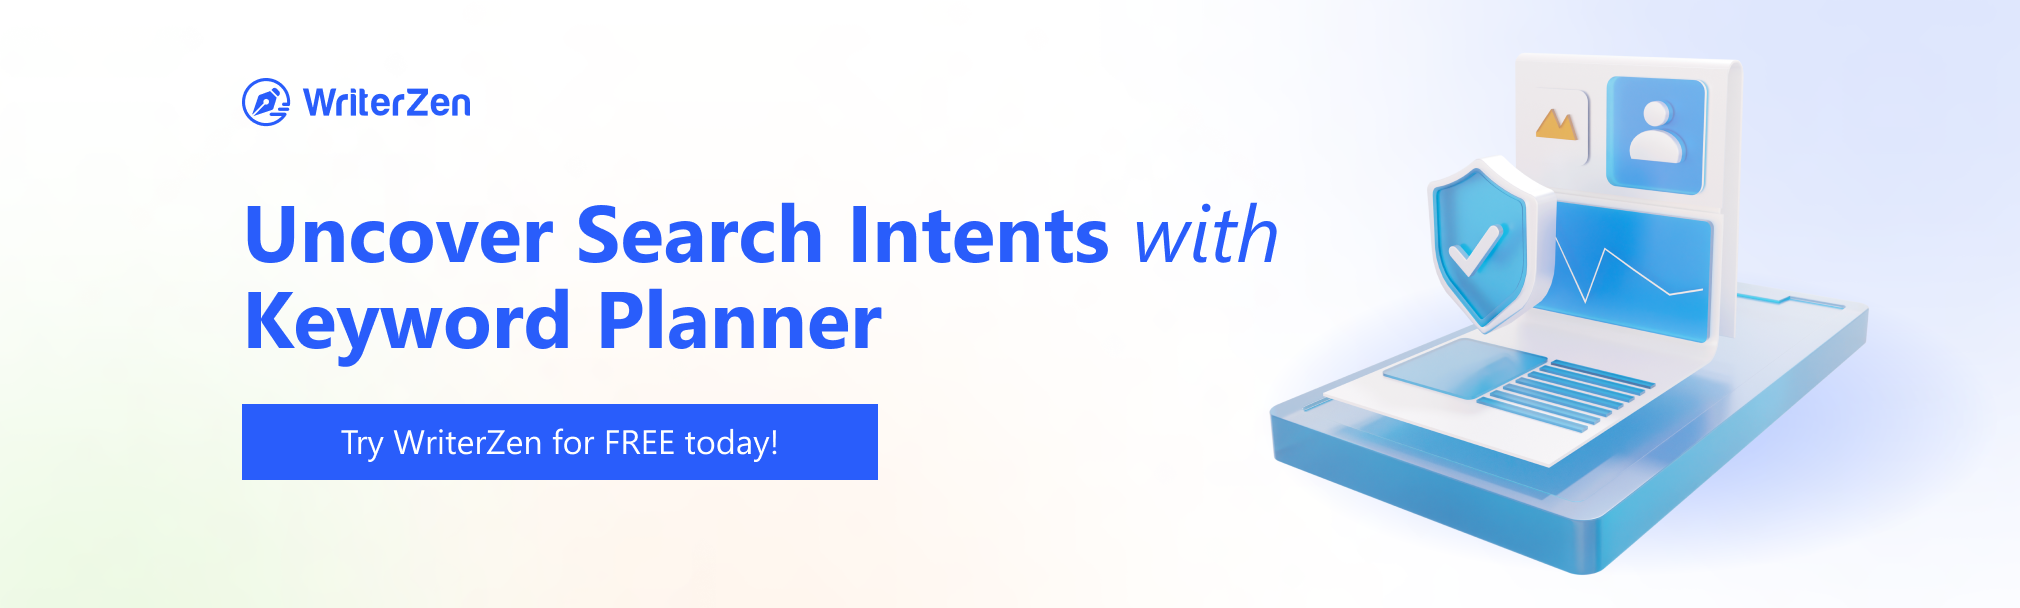 Uncover Search Intents with Keyword Planner